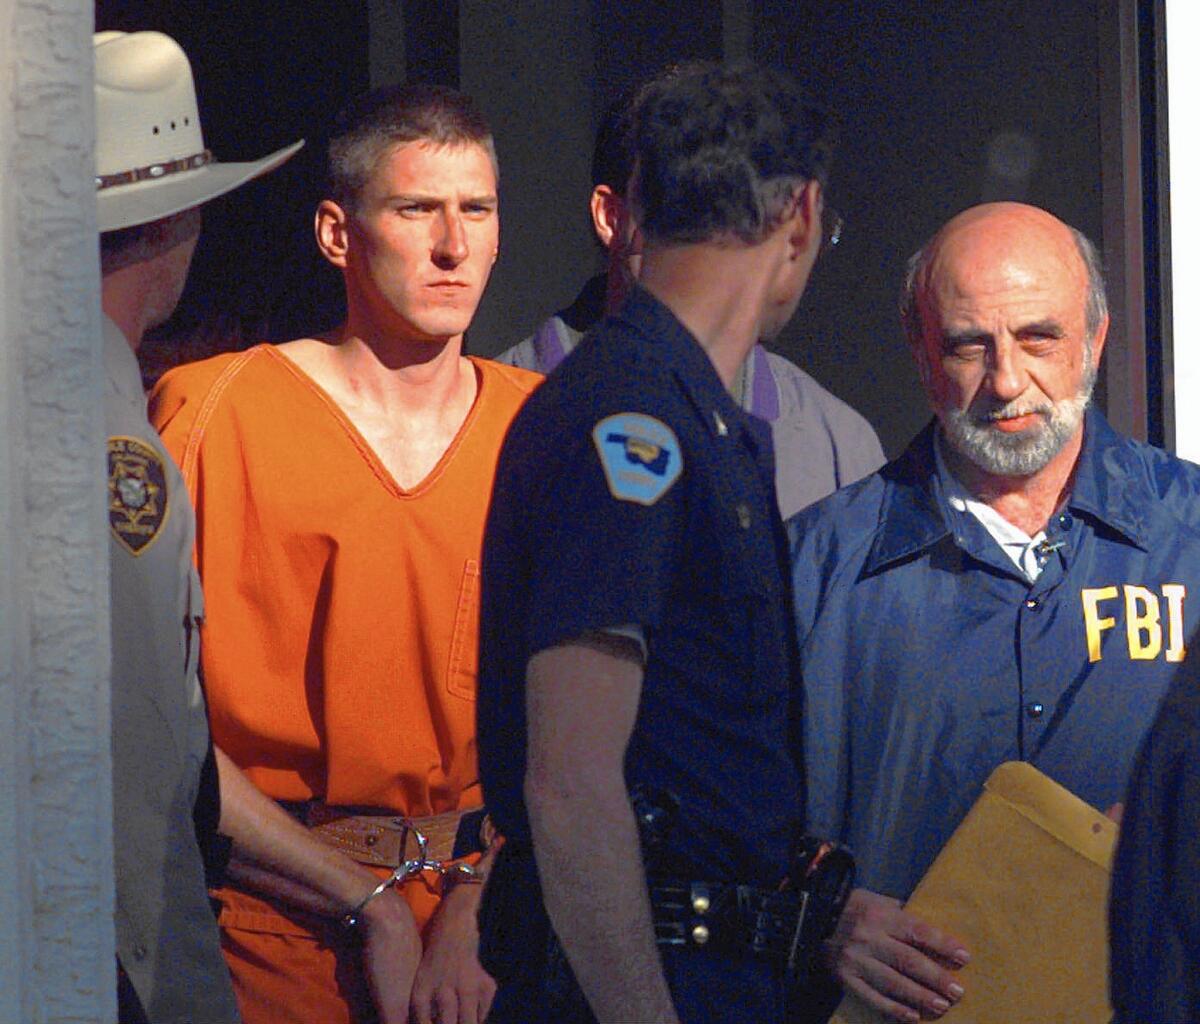 Timothy McVeigh is led out of the Noble County Courthouse 20 years ago after being identified as a suspect in the Oklahoma City bombing.